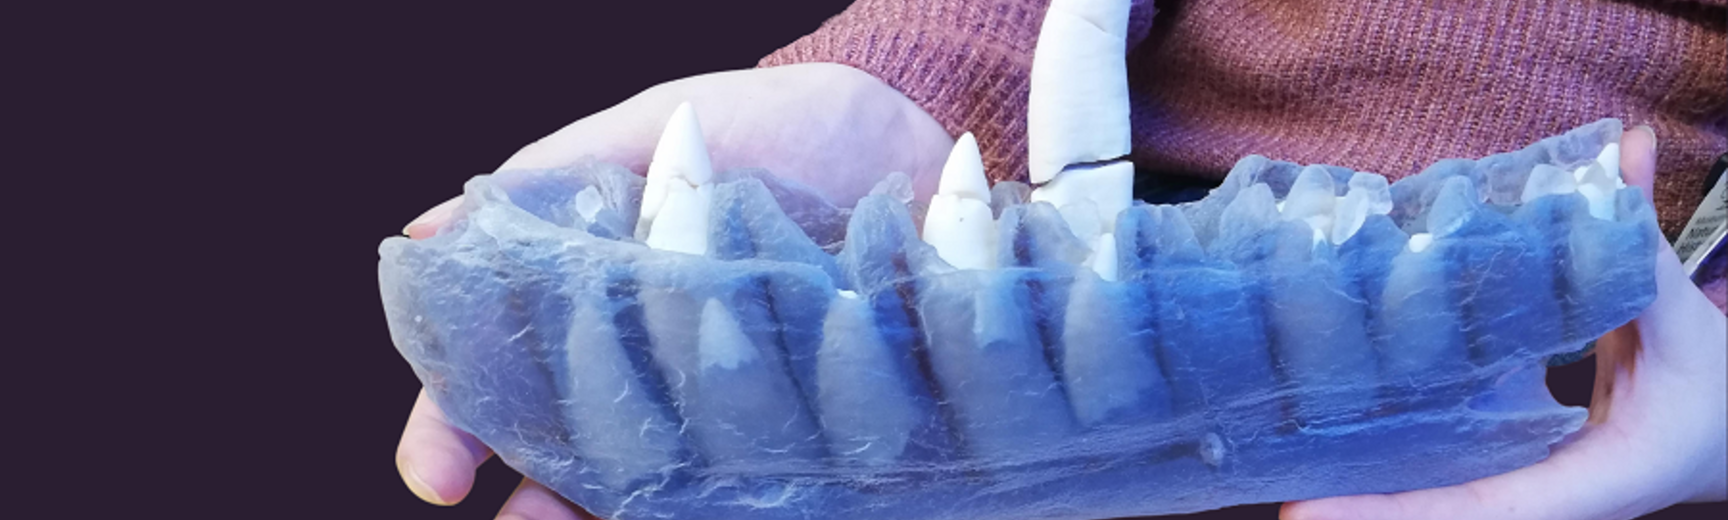 3D print of dinosaur jaw bone held by person wearing protective gloves